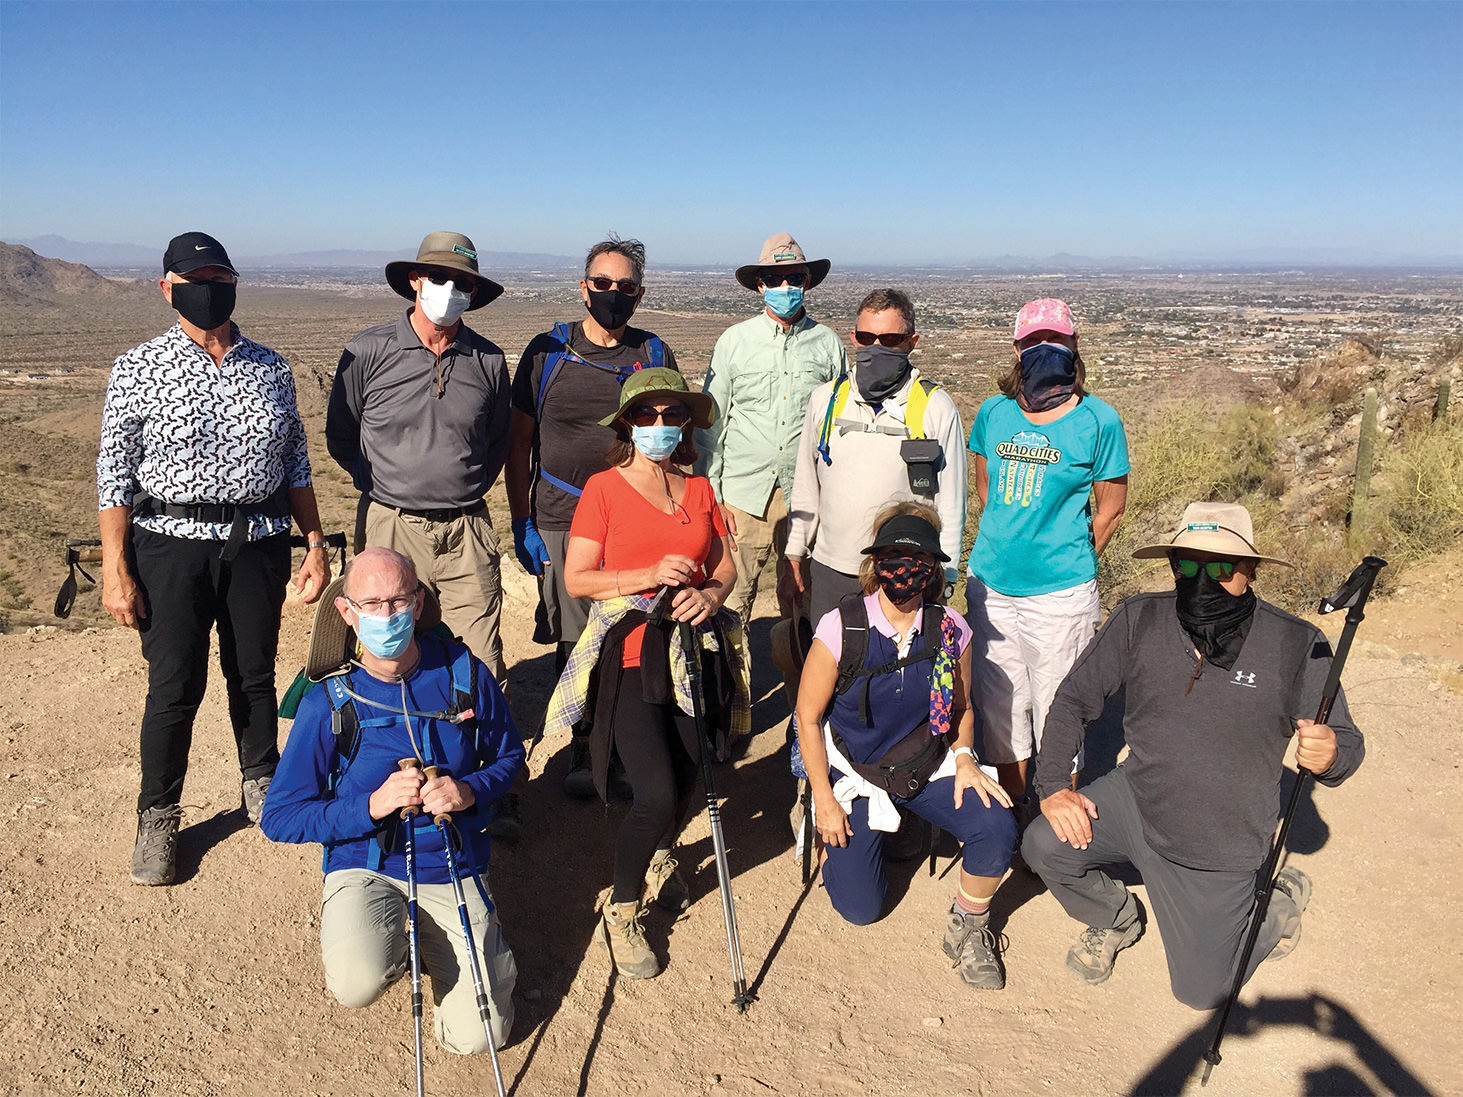 Club hikers atop Goldmine Ridge in San Tan Regional Park; pictured (left to right) front row: Stu Frost, Fabiola Scotto, Dawn Kain Bjustrom, and Tom Scotto; back row (left to right): Barb Smith, Scott Downey, David Coffman, Gaary Breitbach, Jack Rubino, and Kitch Trost